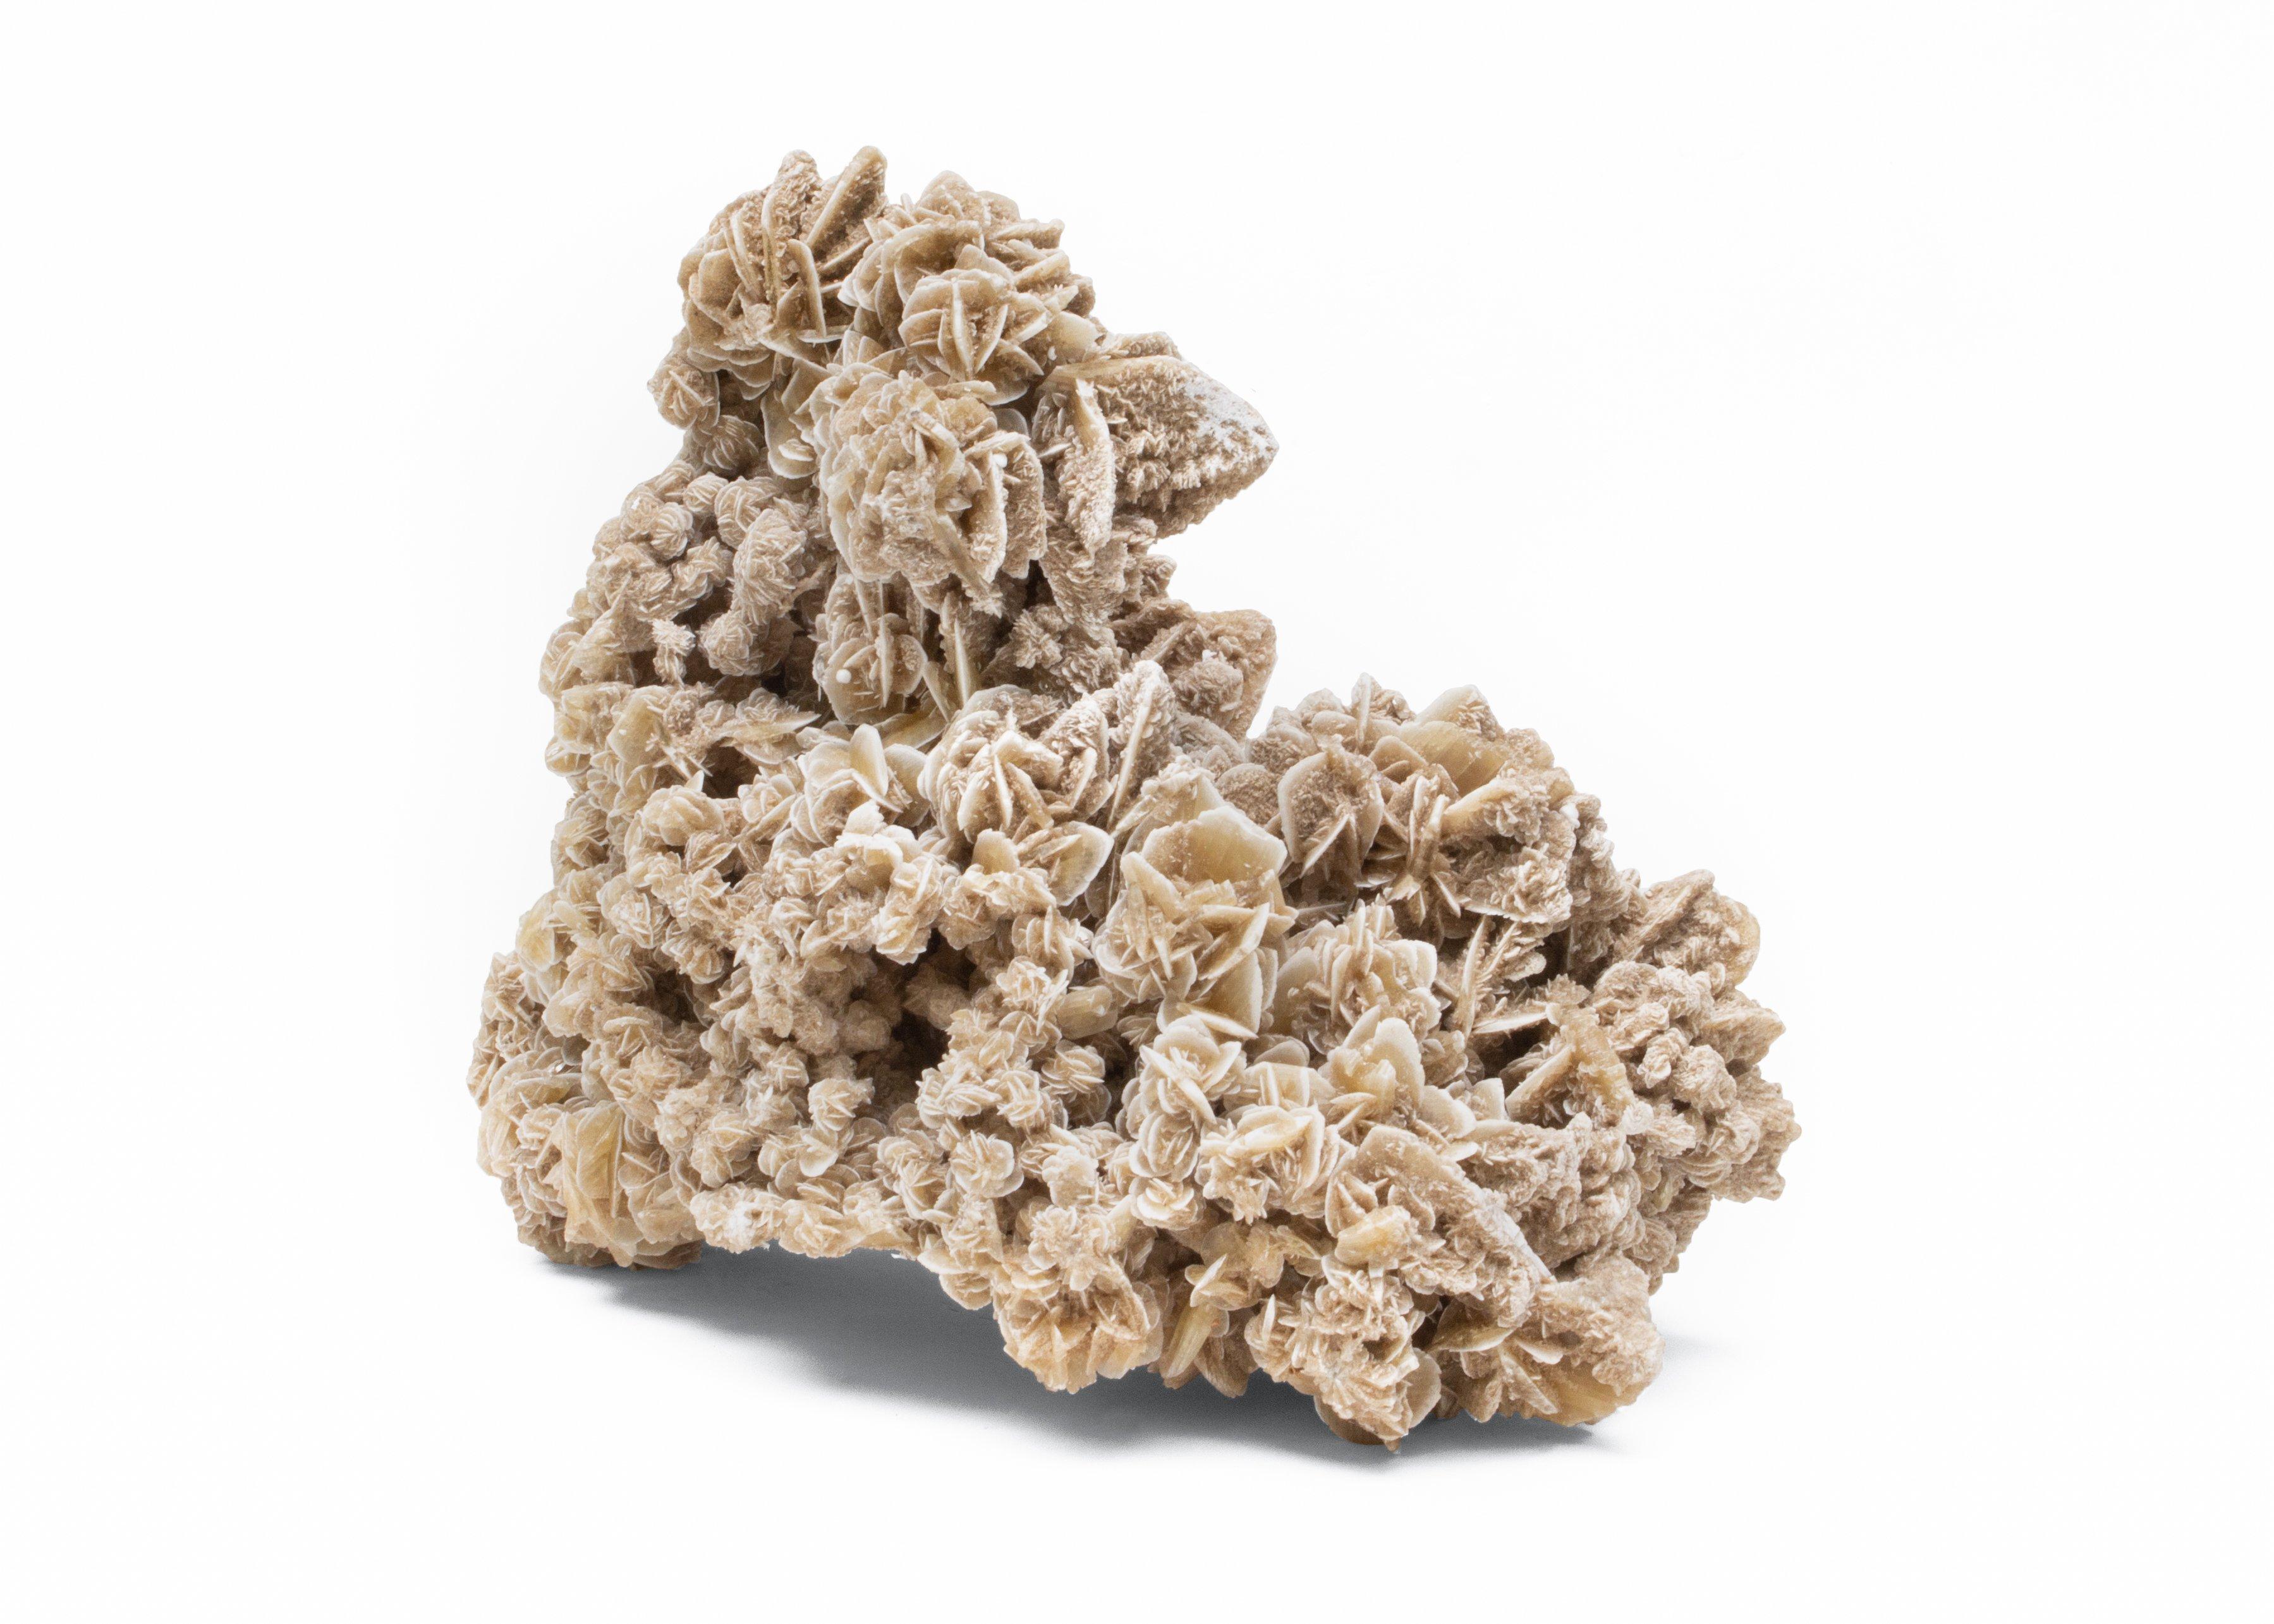 Desert Rose Selenite also known as Gypsum Rose or Sand Rose, is a type of selenite formed from a combination of water, wind, and sand. It is well known for its naturally forming selenite-sand sprouts that emulate rosebuds. This particular form is